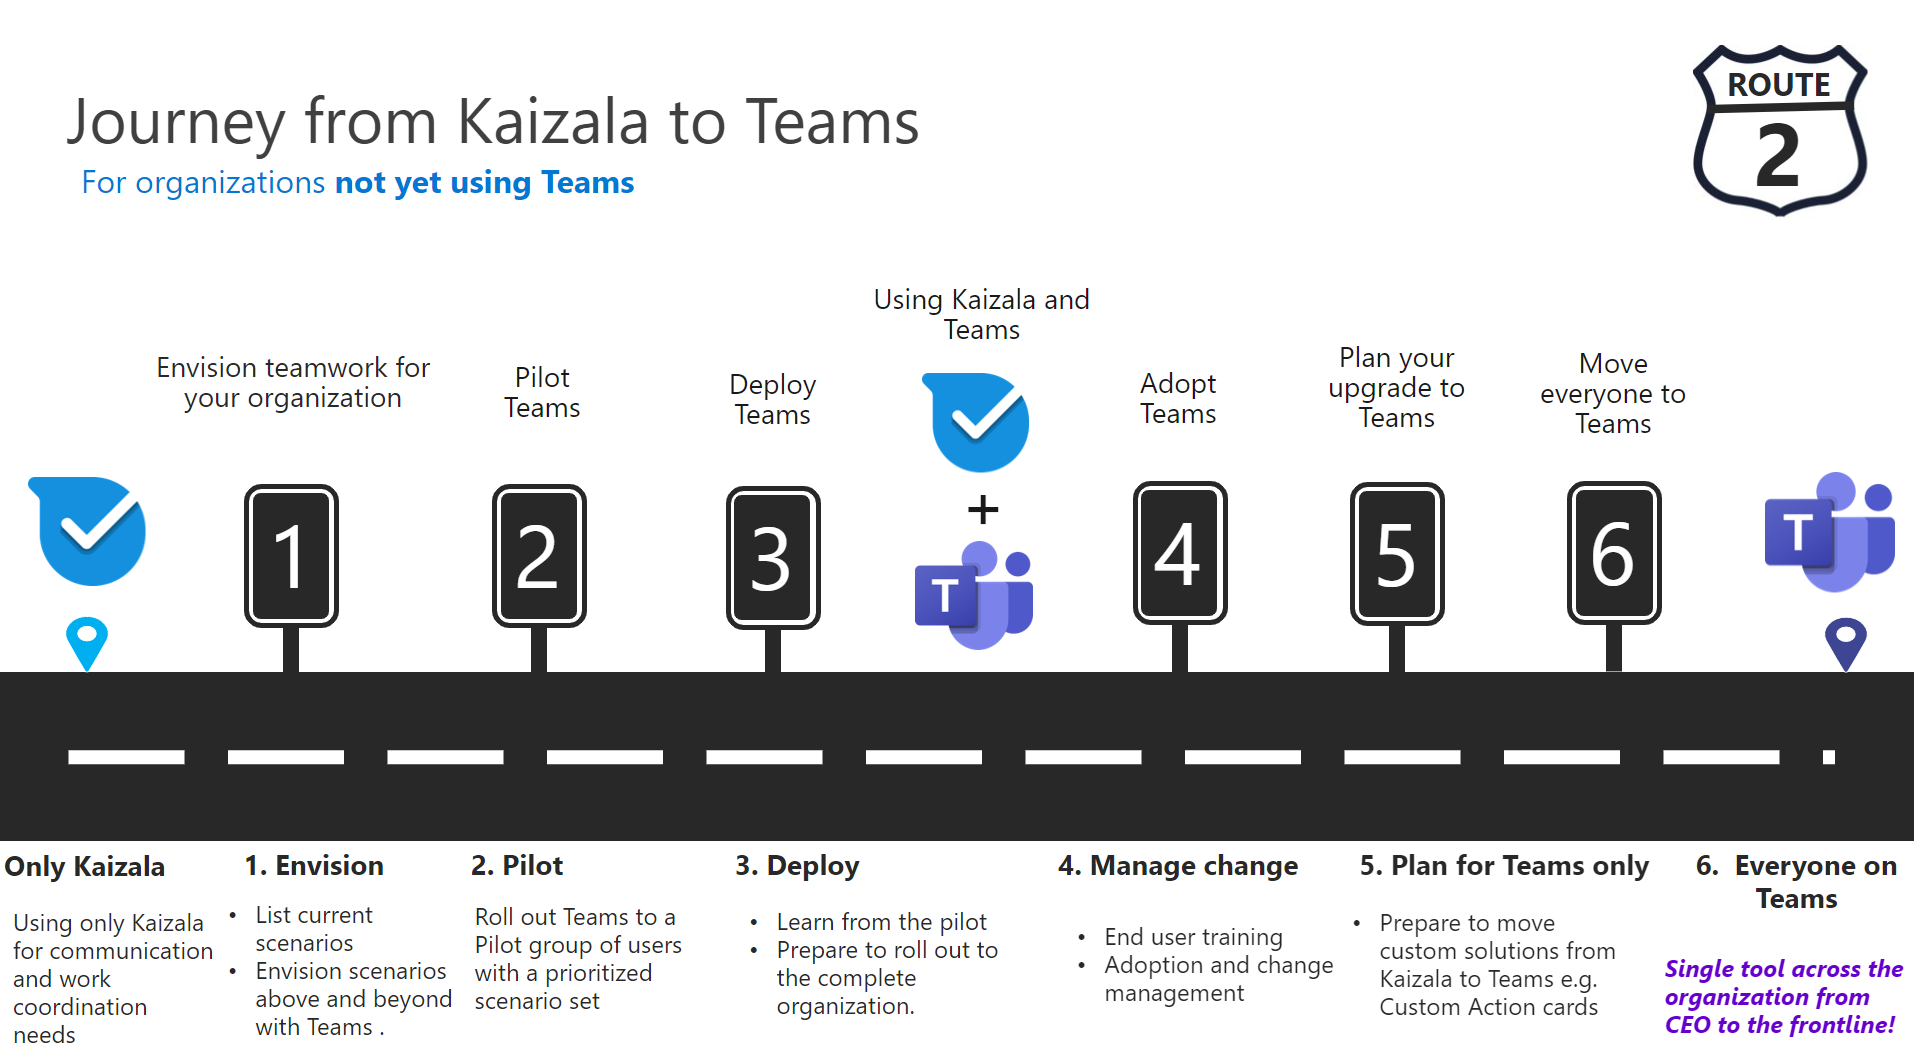 Screenshot that depicts the path for organizations not currently using Teams.